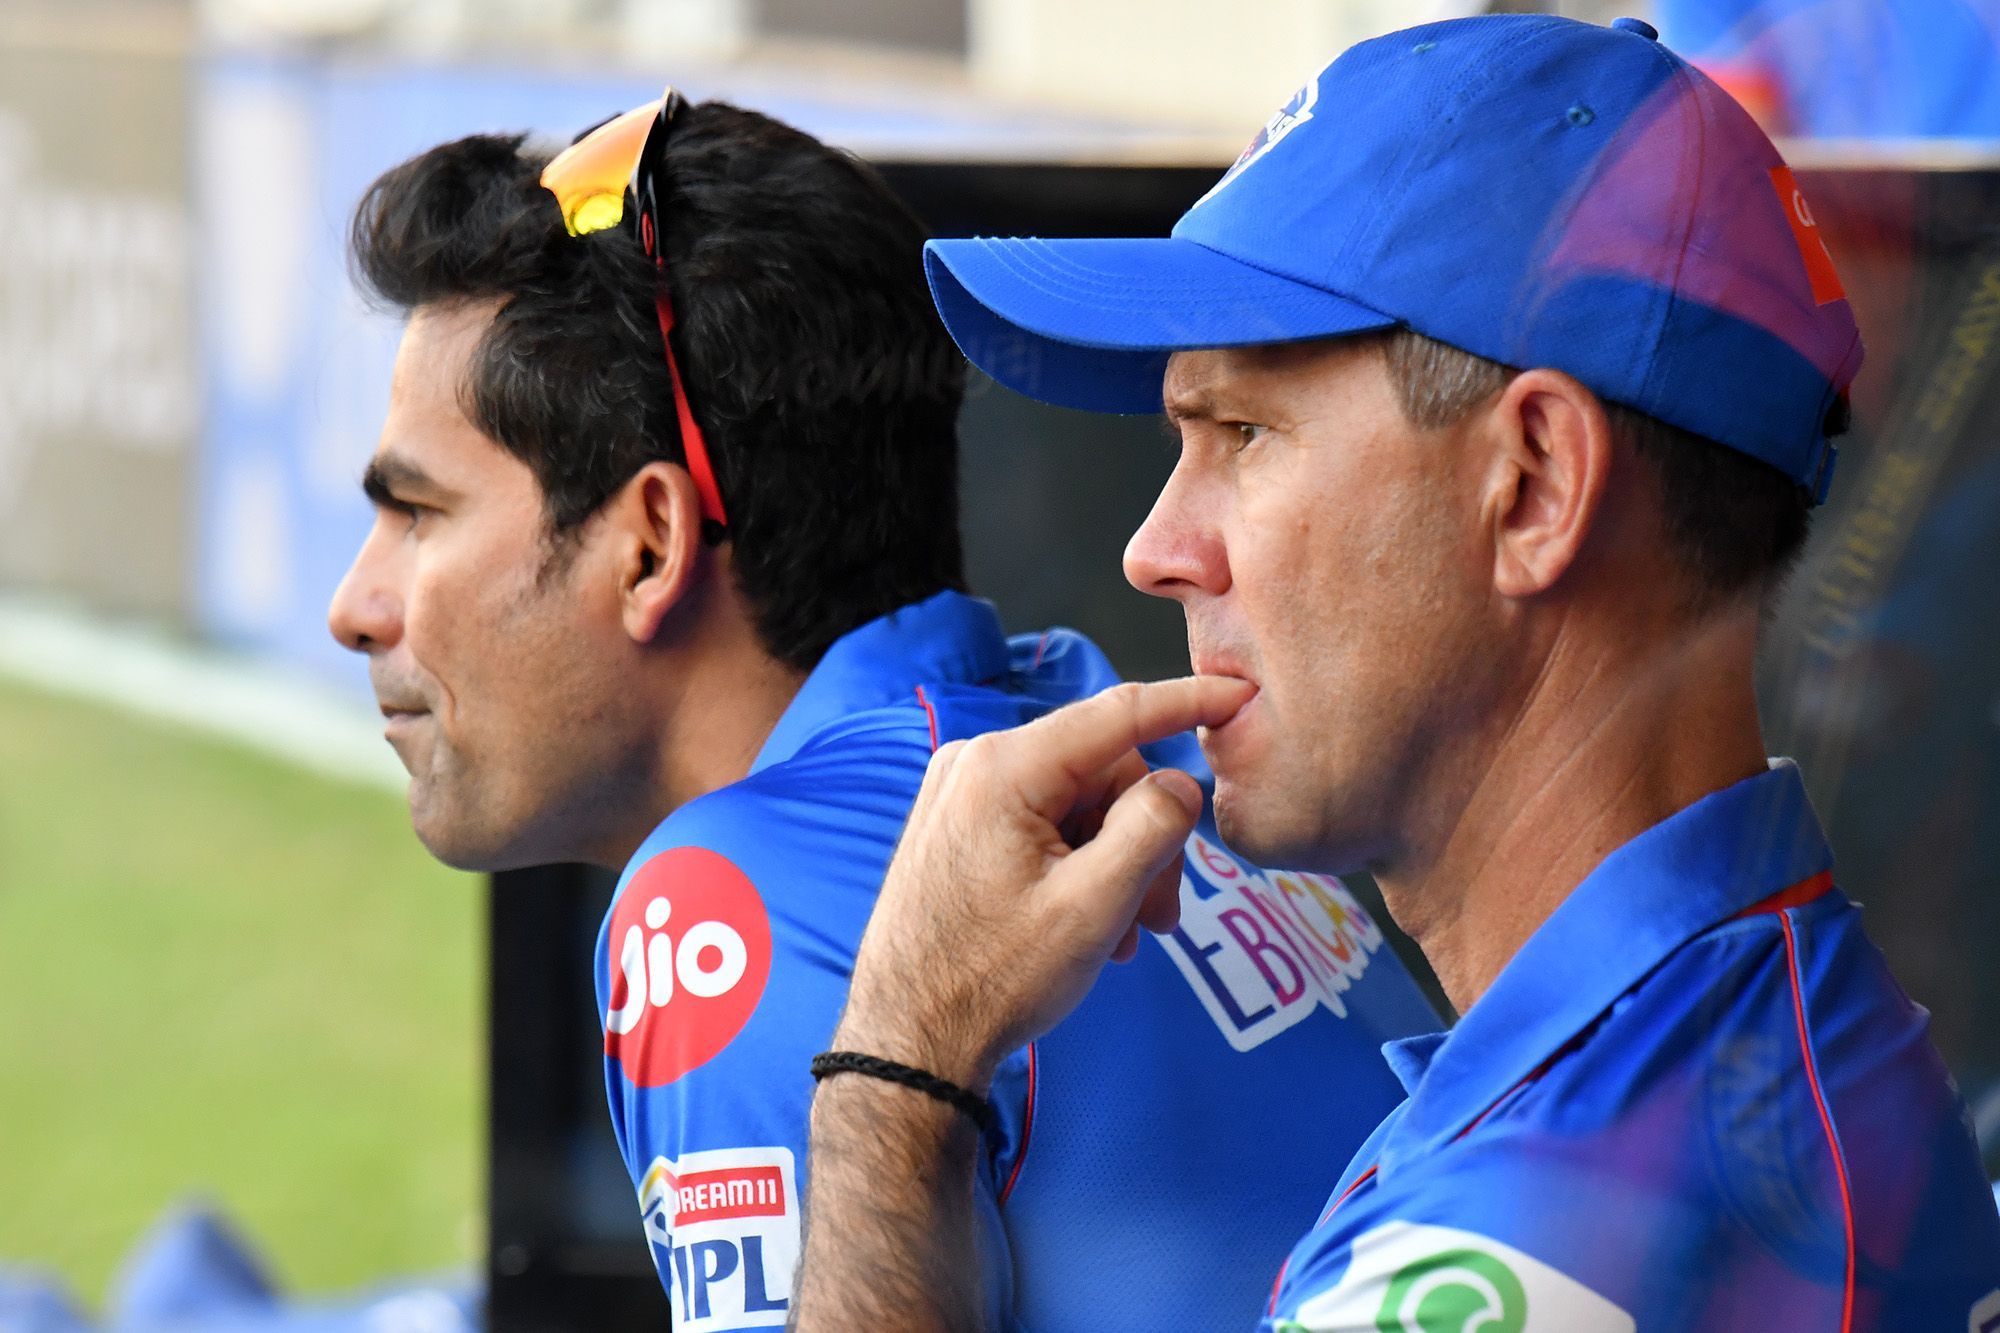 DC coach Ricky Ponting in the dugout during one of the games | BCCI/IPL